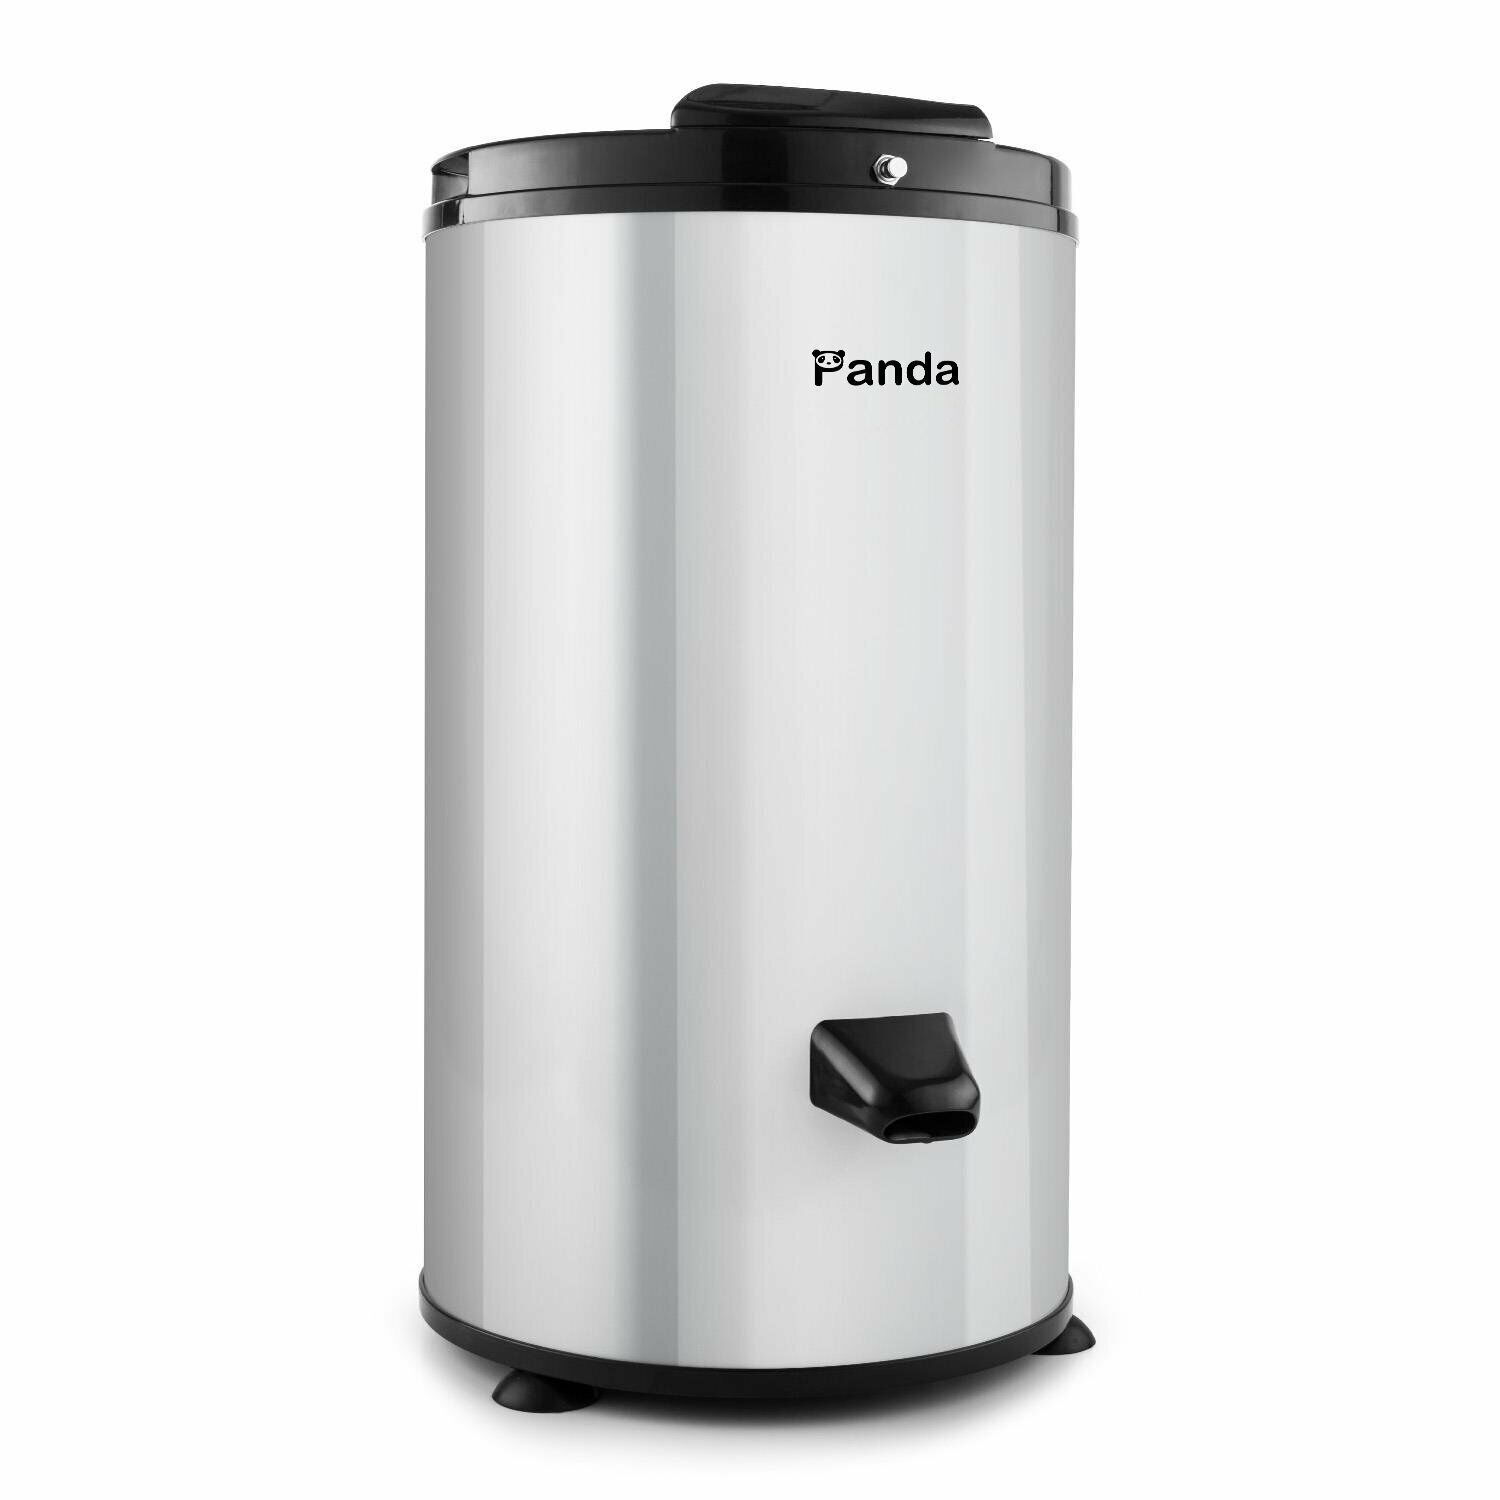 Refurbished Panda 3200rpm Portable Spin Dryer 110V/22lb Capacity Stainless Steel